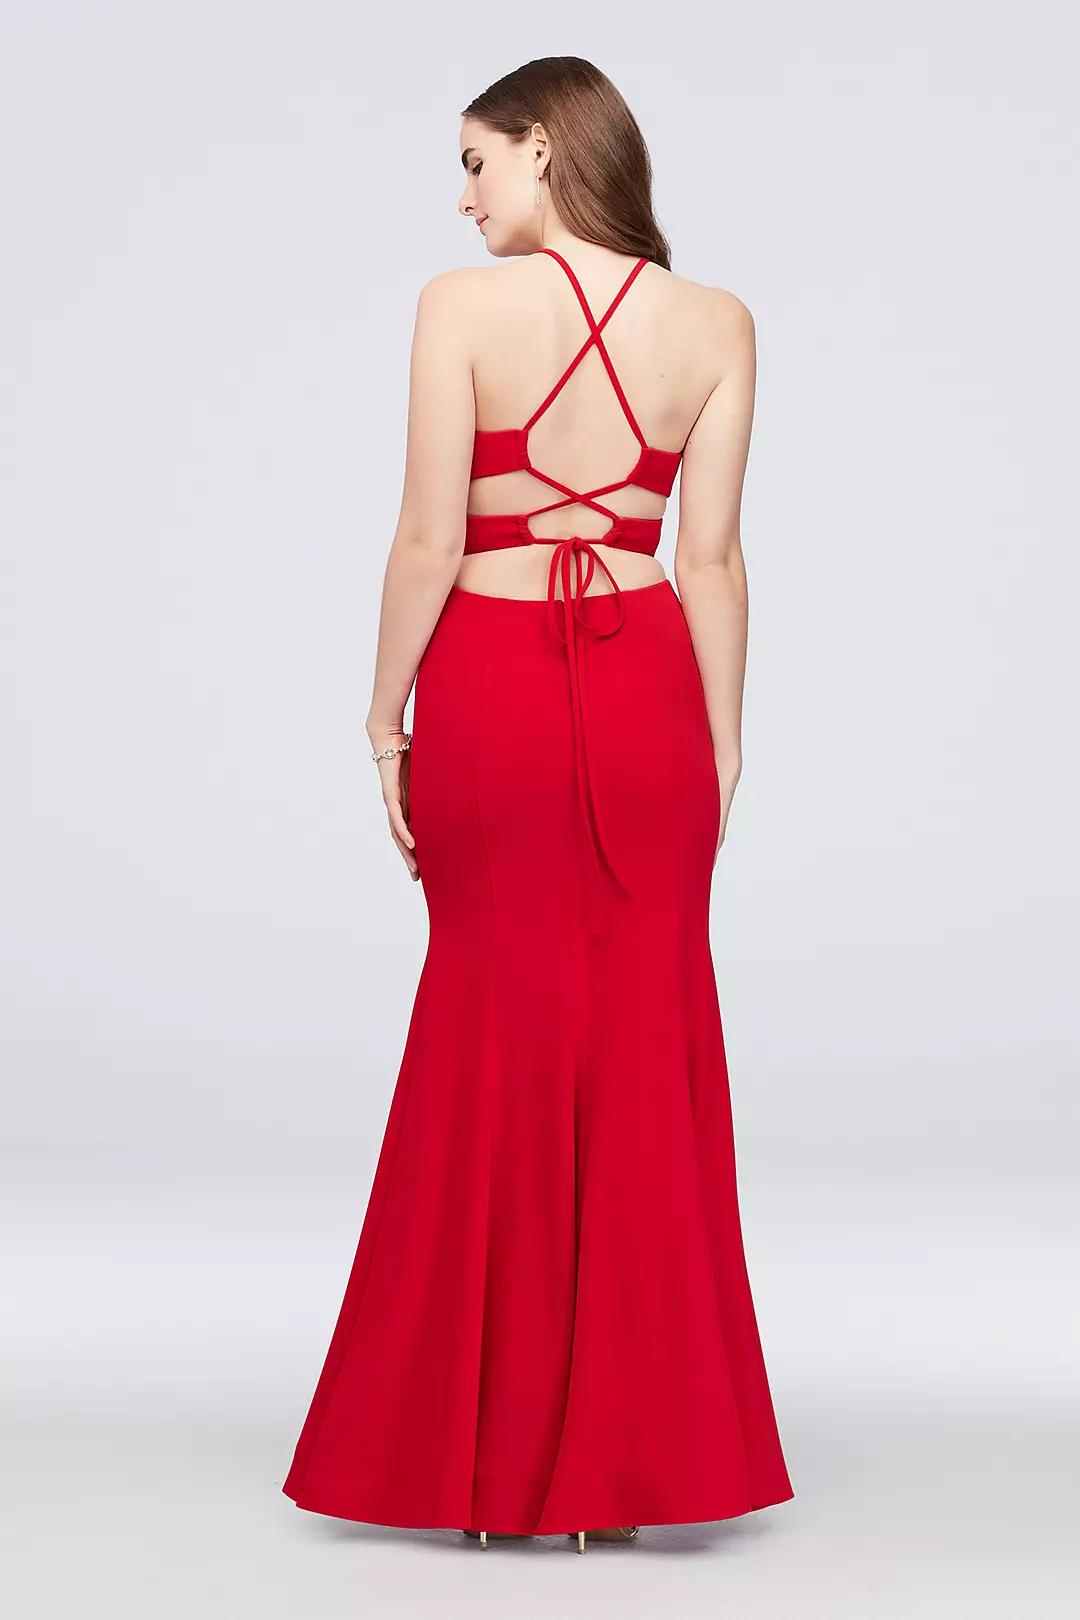 Scuba Crepe Mermaid Dress with Strappy Back Image 2